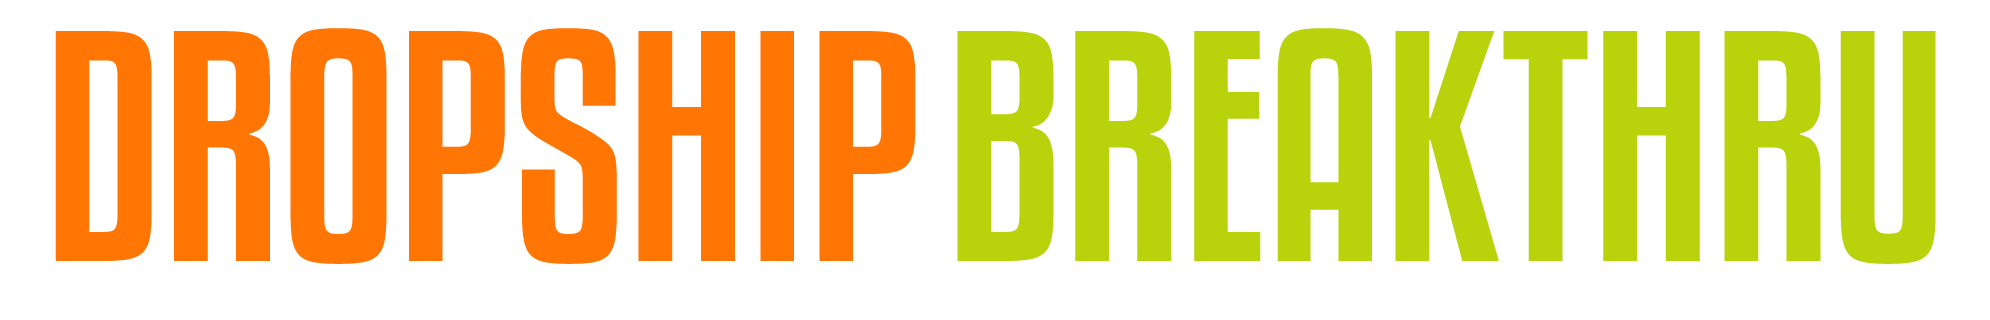 dropship breakthru logo, learn how to build and grow a high ticket dropshipping business